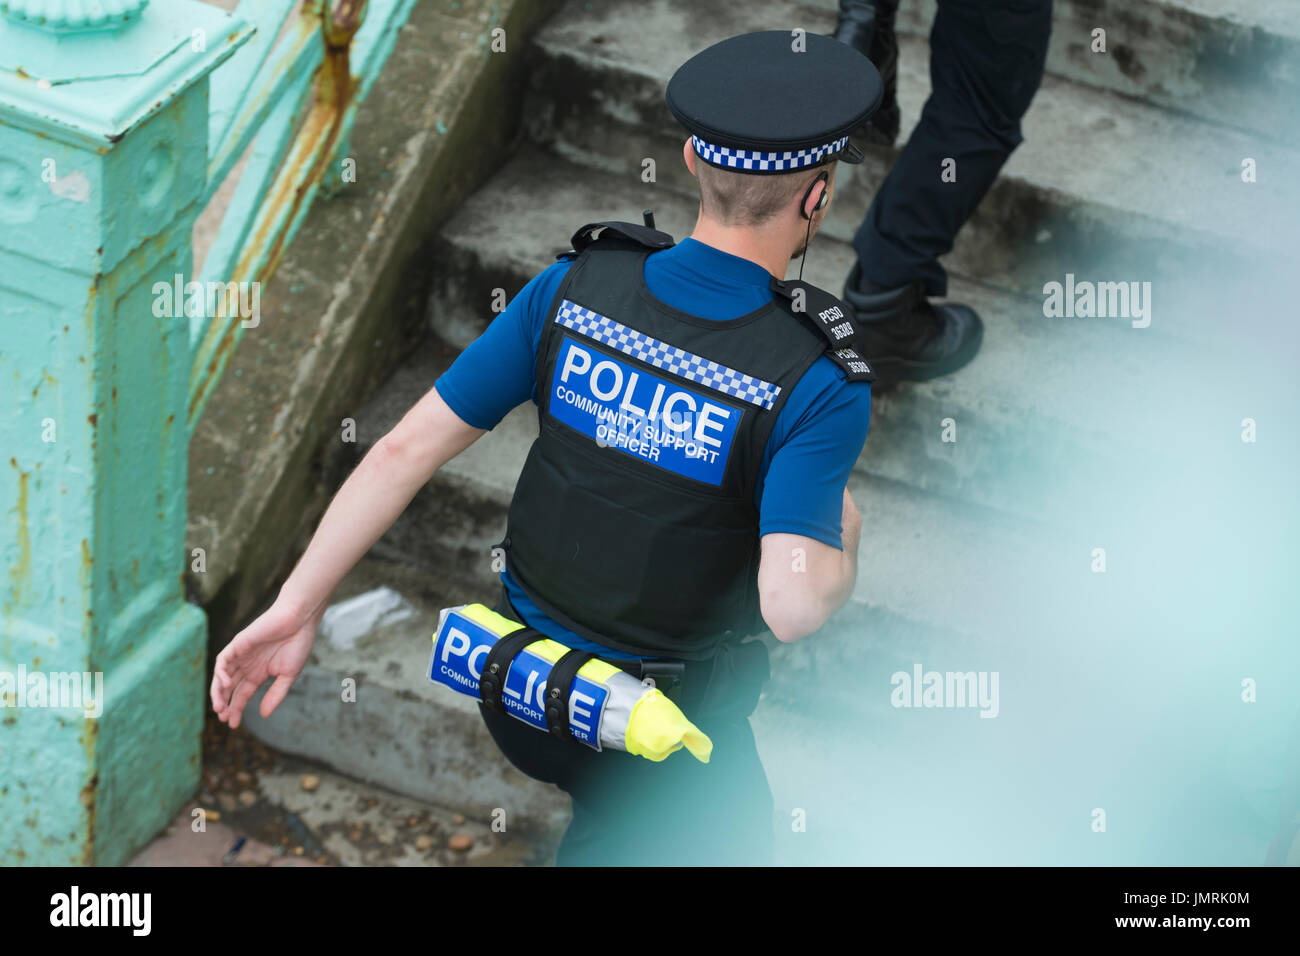 PCSO (Police Community Support Officer) angerannt Schritte in Brighton, East Sussex, England, UK. Stockfoto